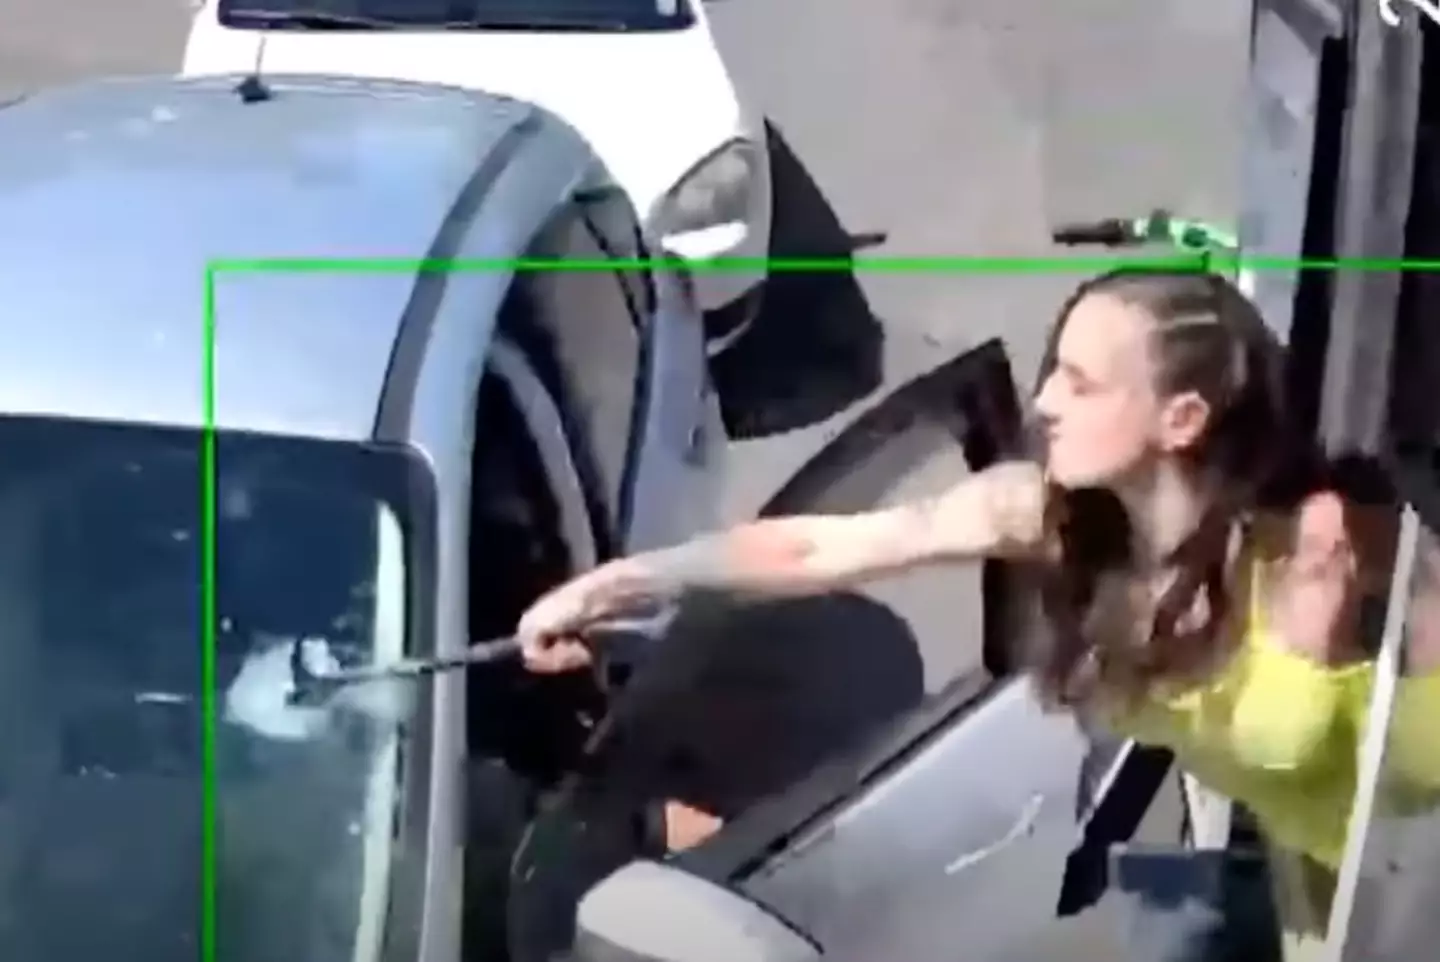 A barista in Seattle ended up smashing a customer's windshield with a hammer after they threw a coffee order at her. (KREM 2 News/YouTube)